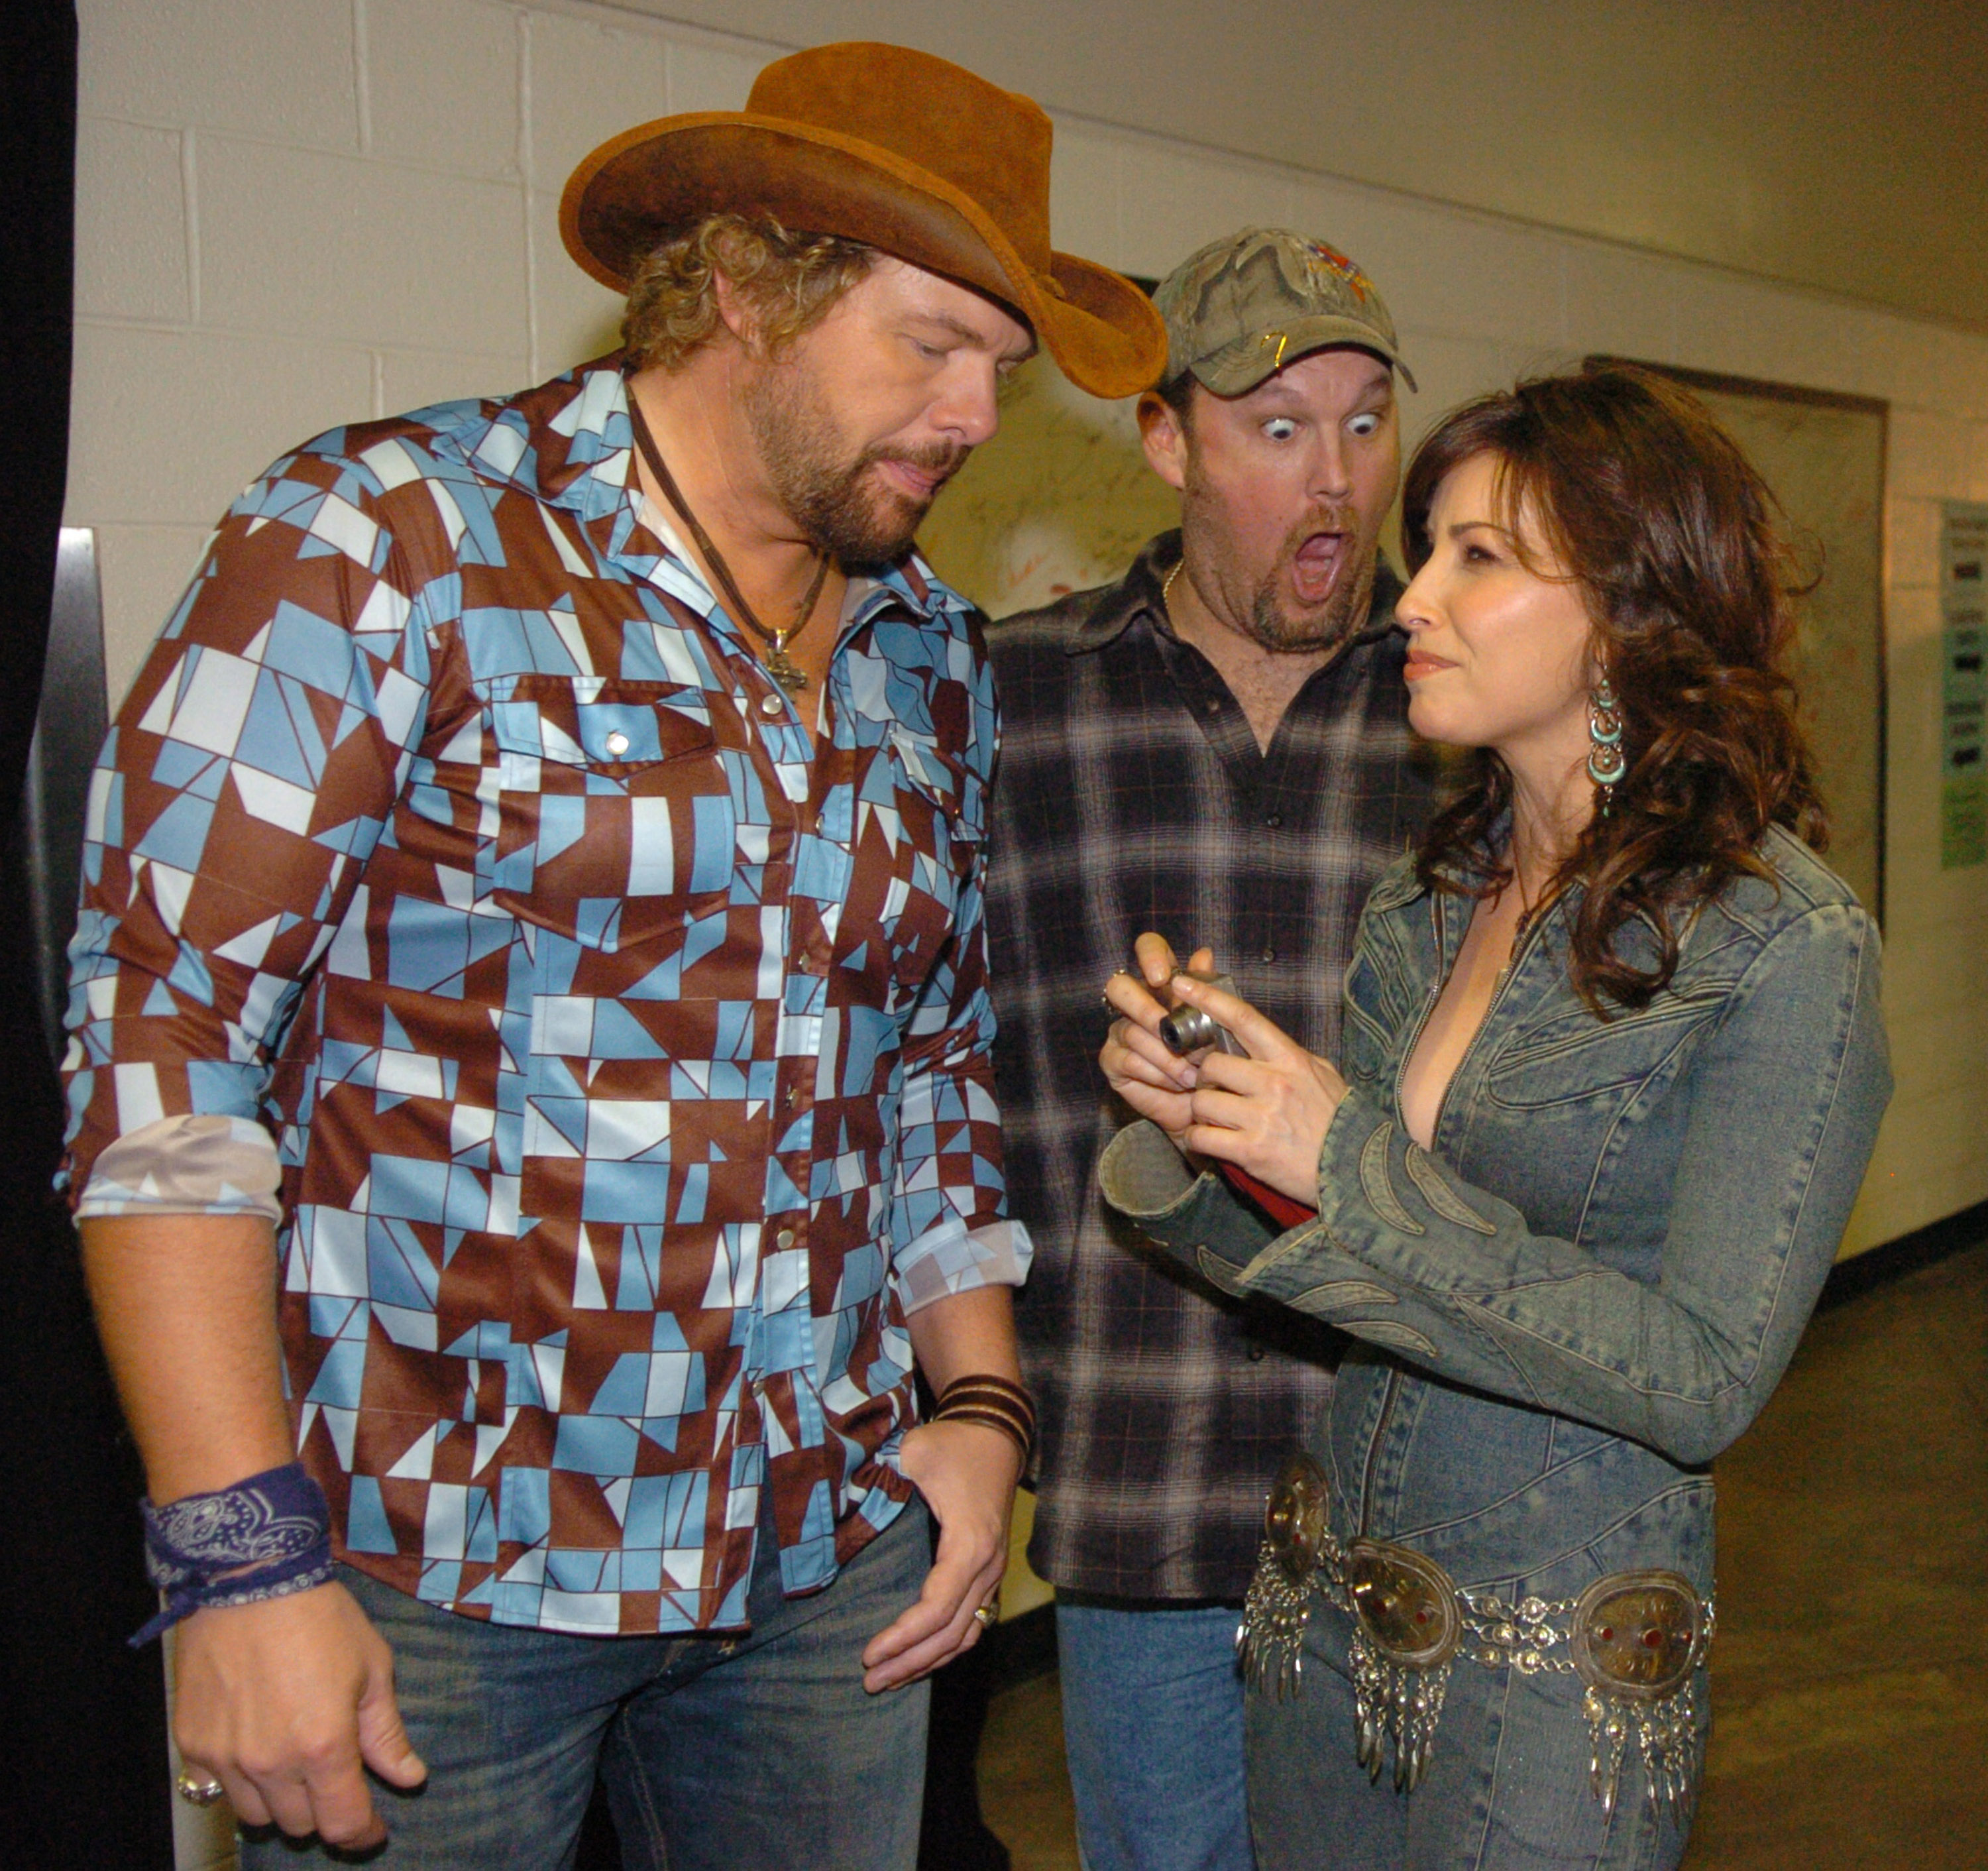 Toby Keith, Larry the Cable Guy, and Gina Gershon during the CMT Music Awards in Nashville, Tennessee on April 11, 2005 | Source: Getty Images